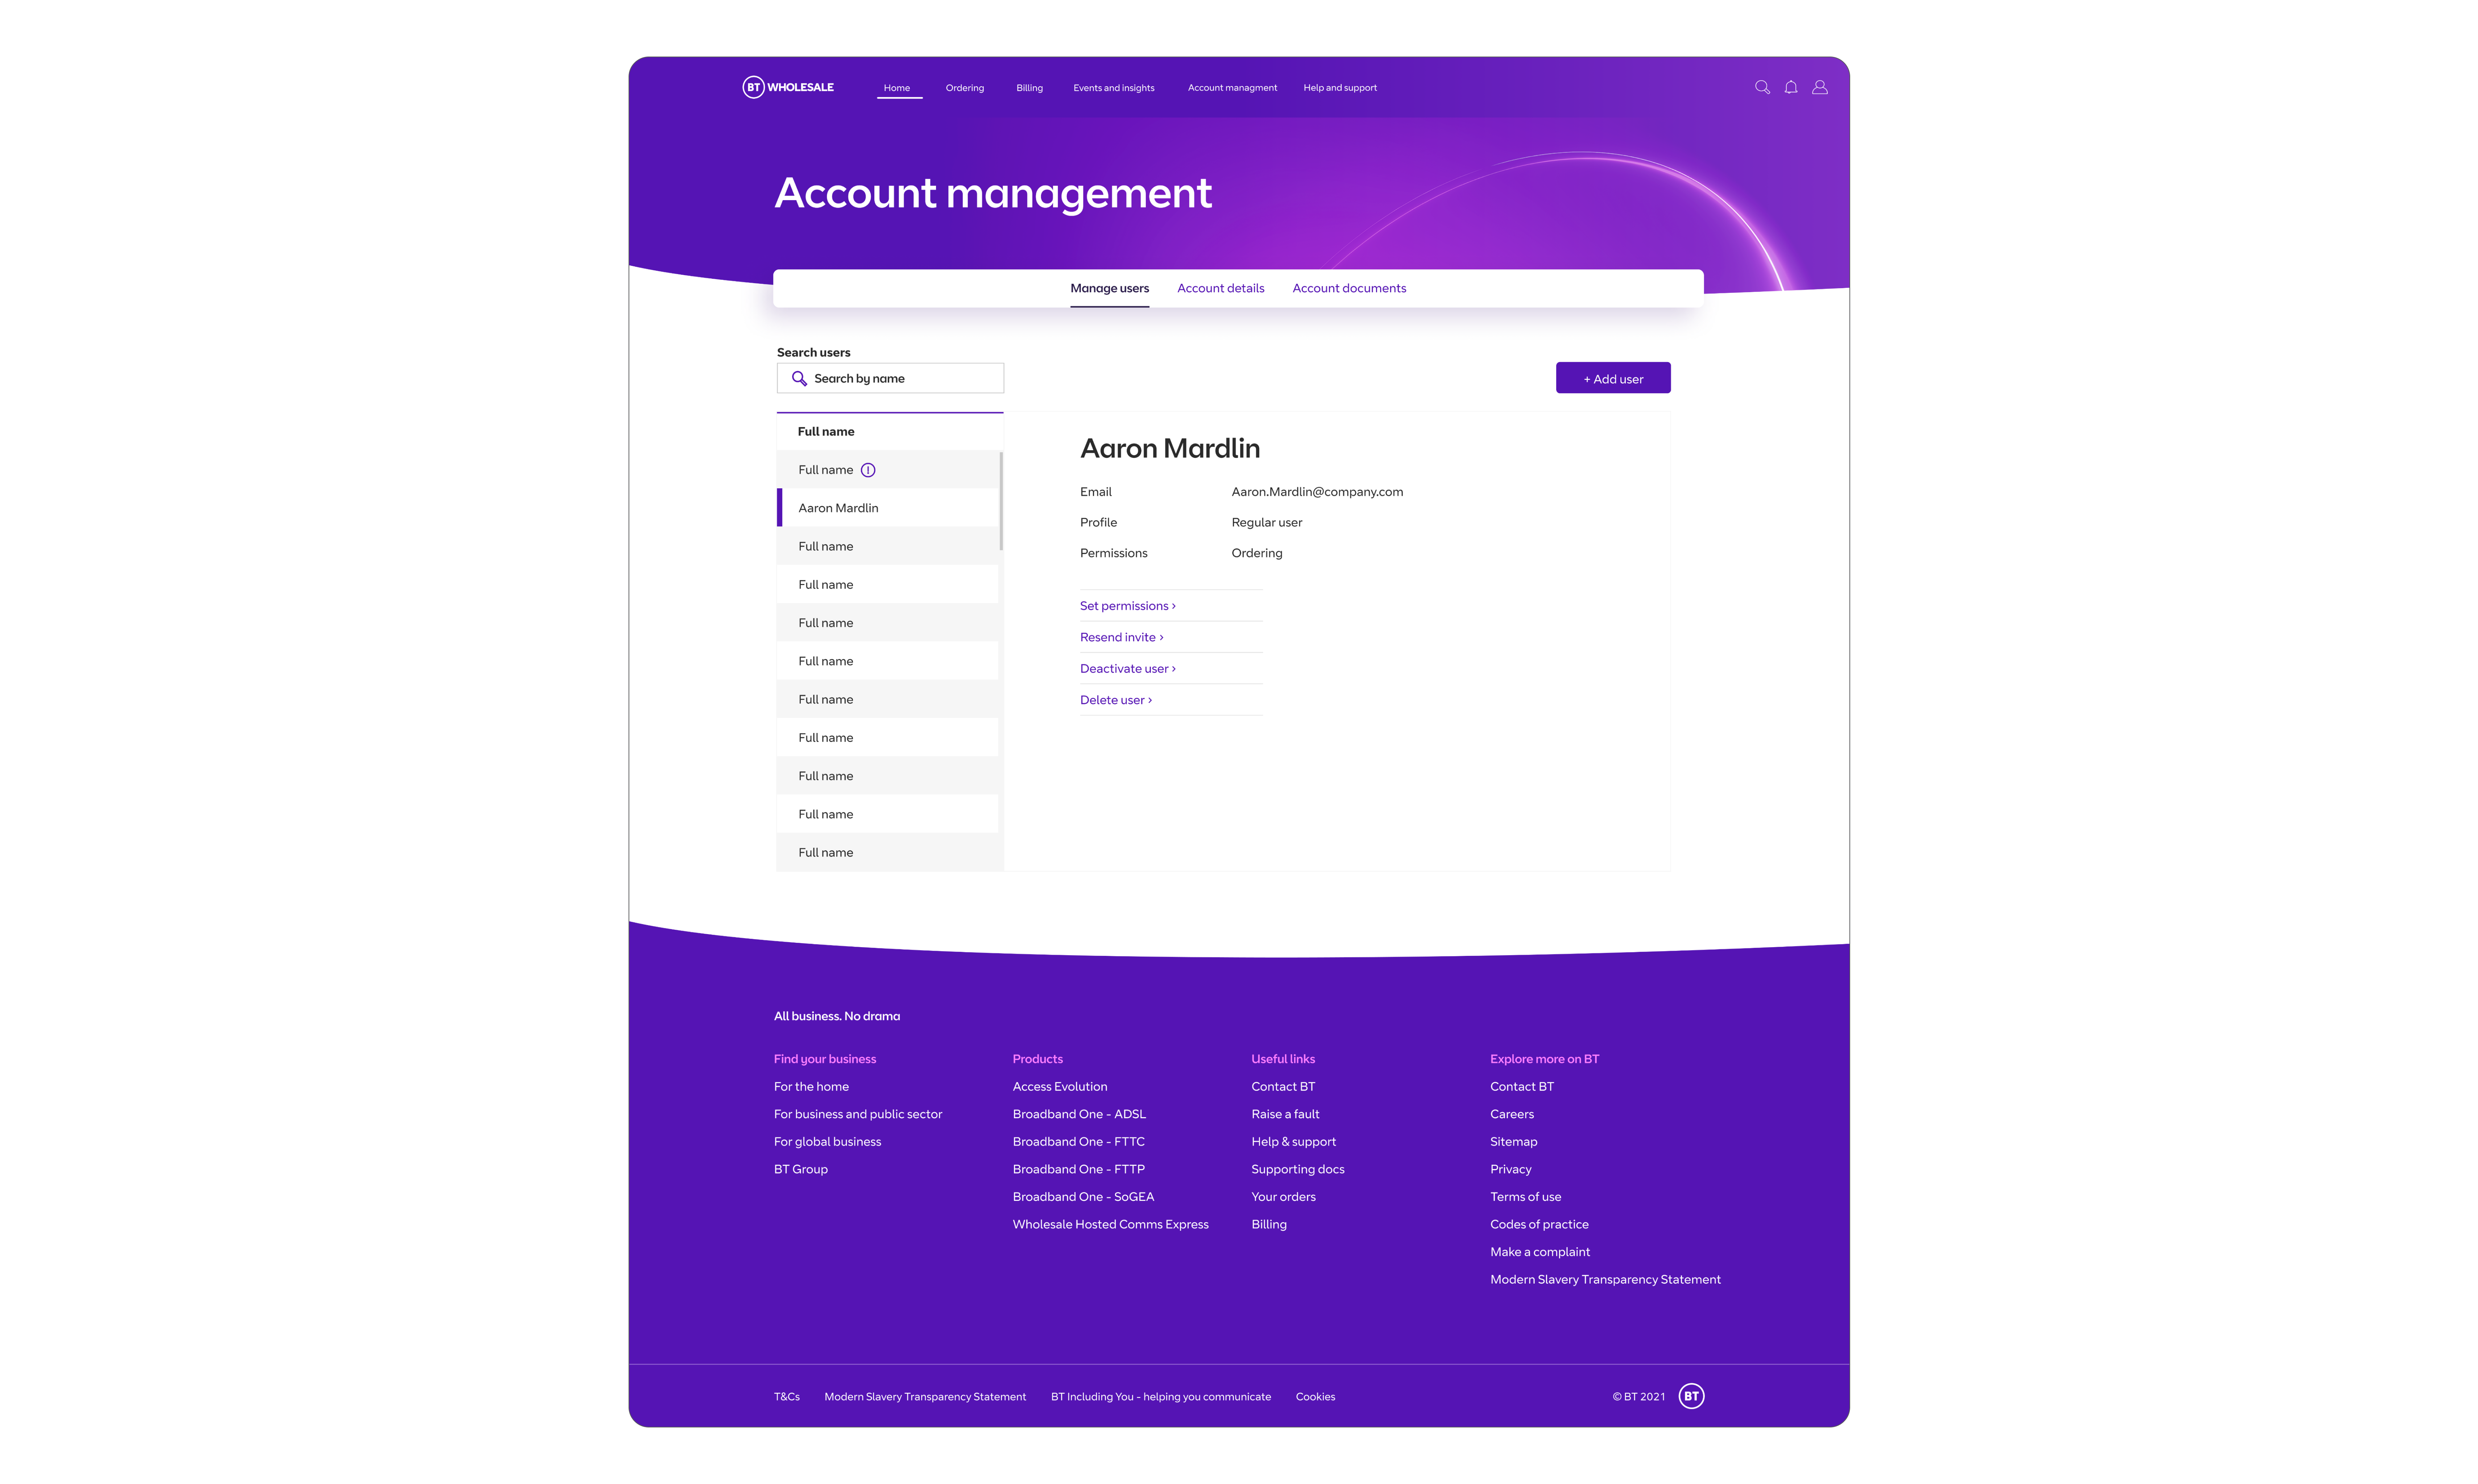 Account management page